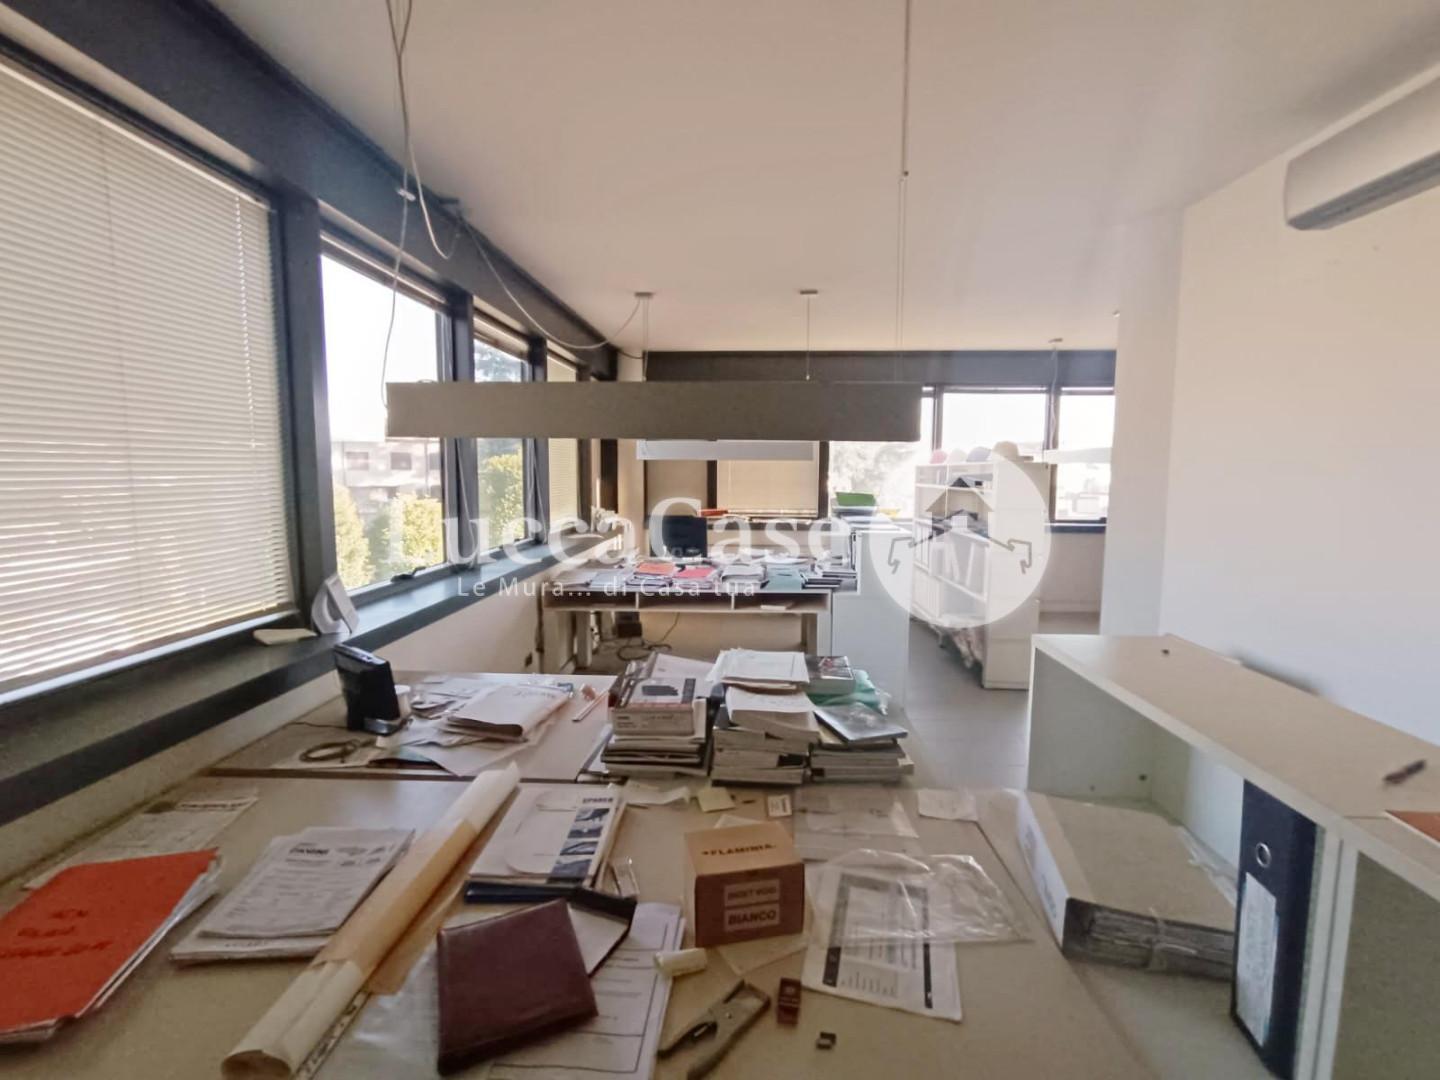 Office for commercial rentals in Capannori (LU)